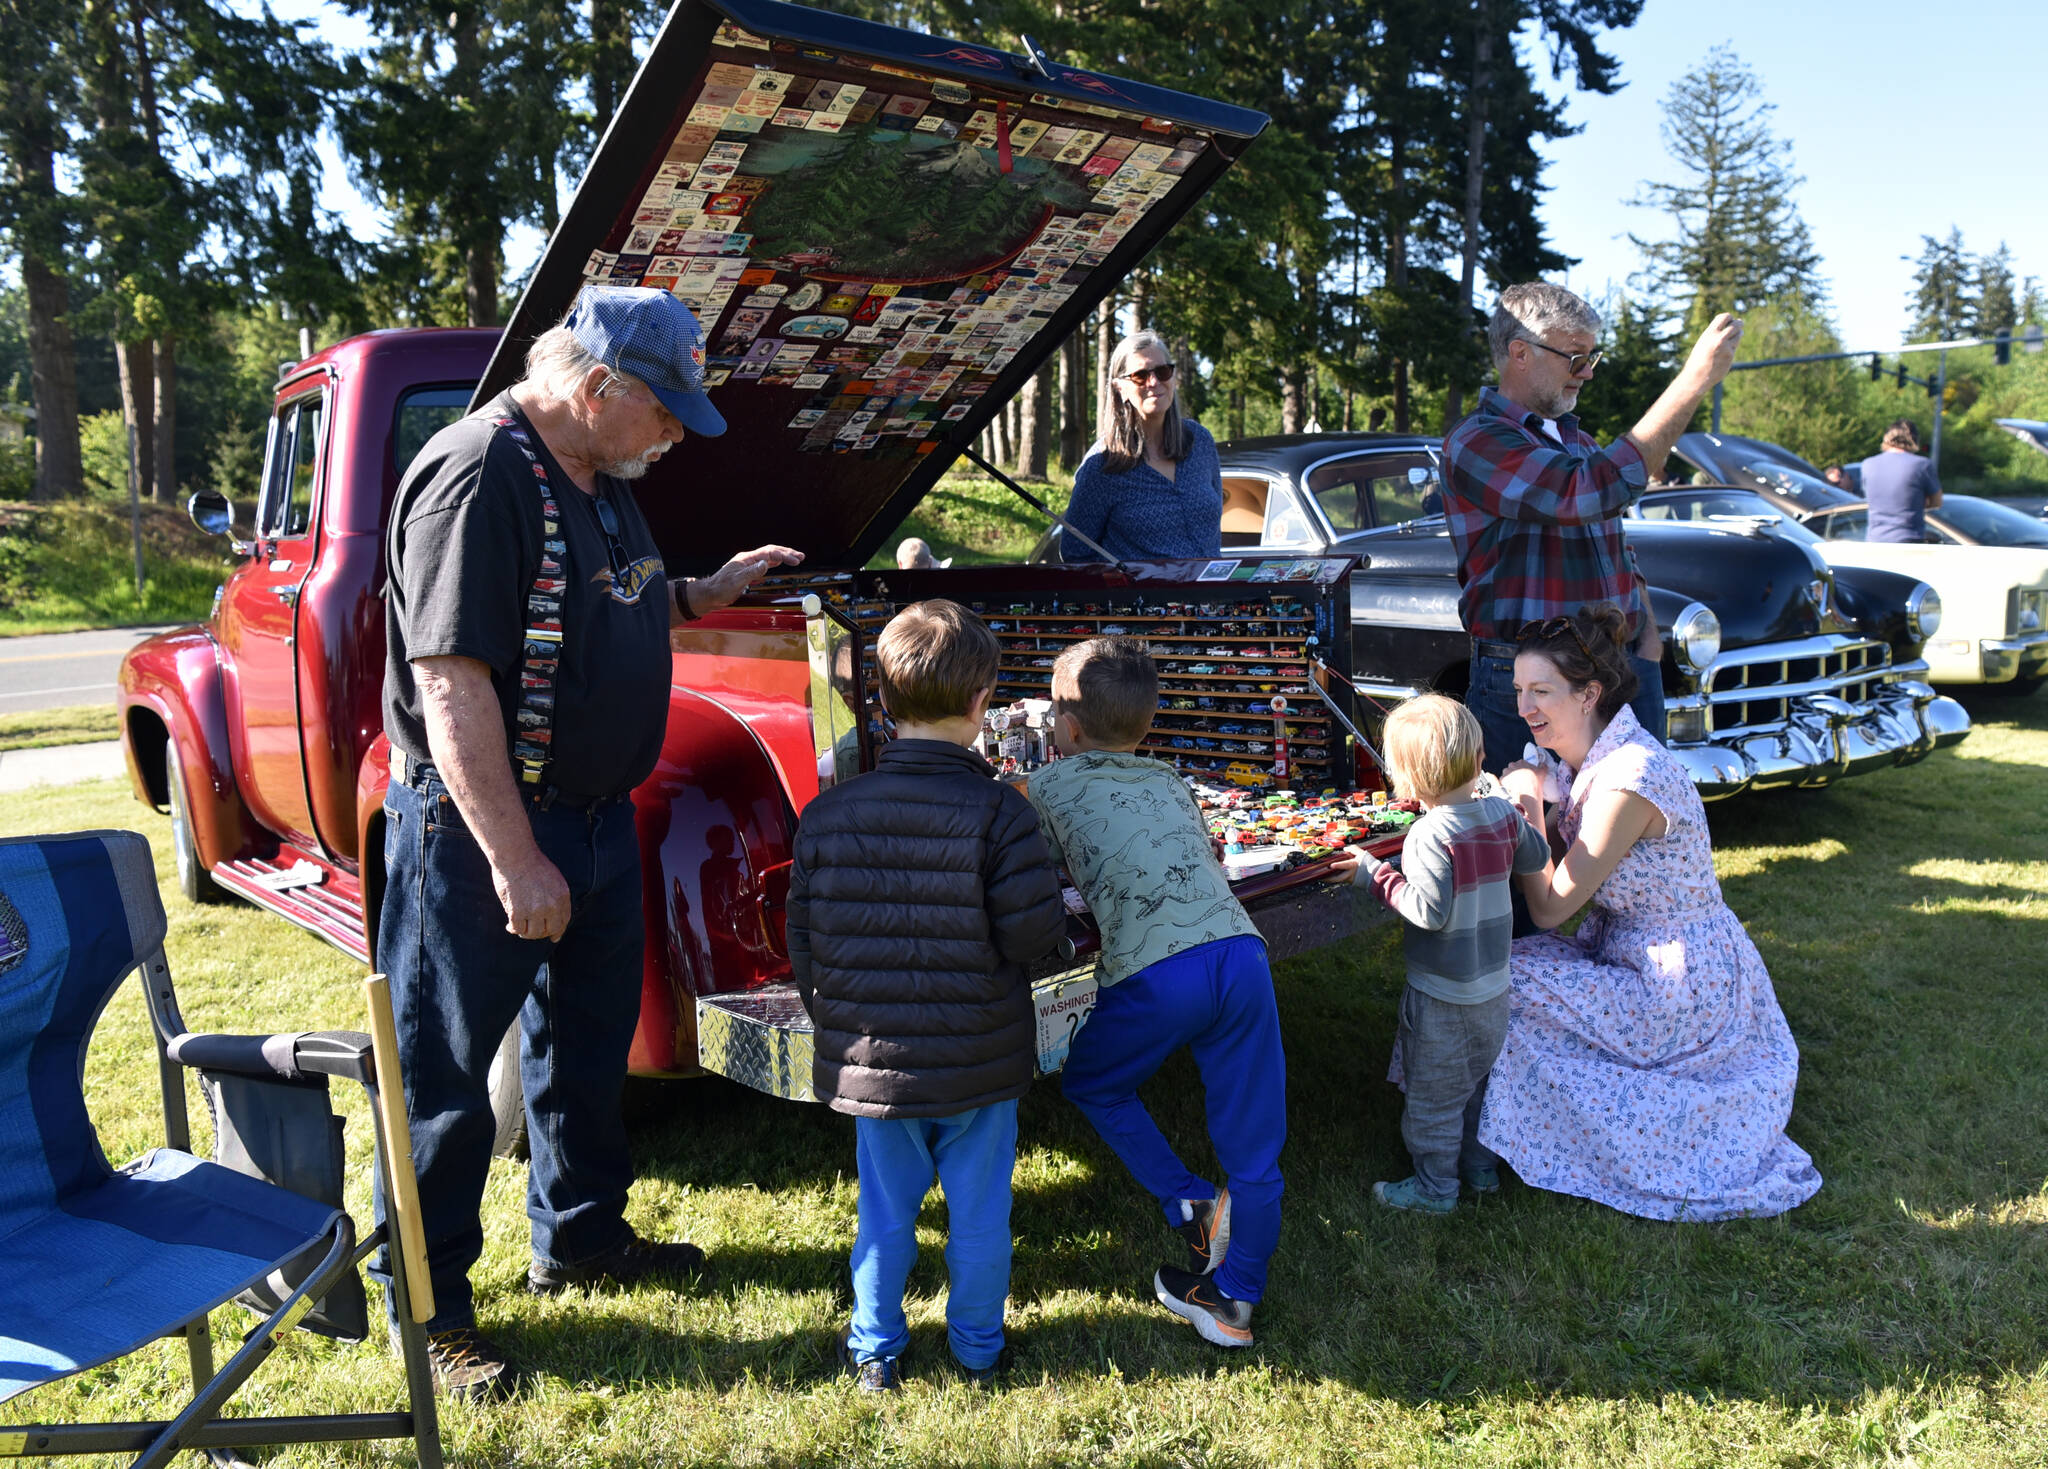 Reid Cunningham and Holden Heatherington, along with Thomas Magin and his mother, Alison Brock, look at a display of toy cars at the show.